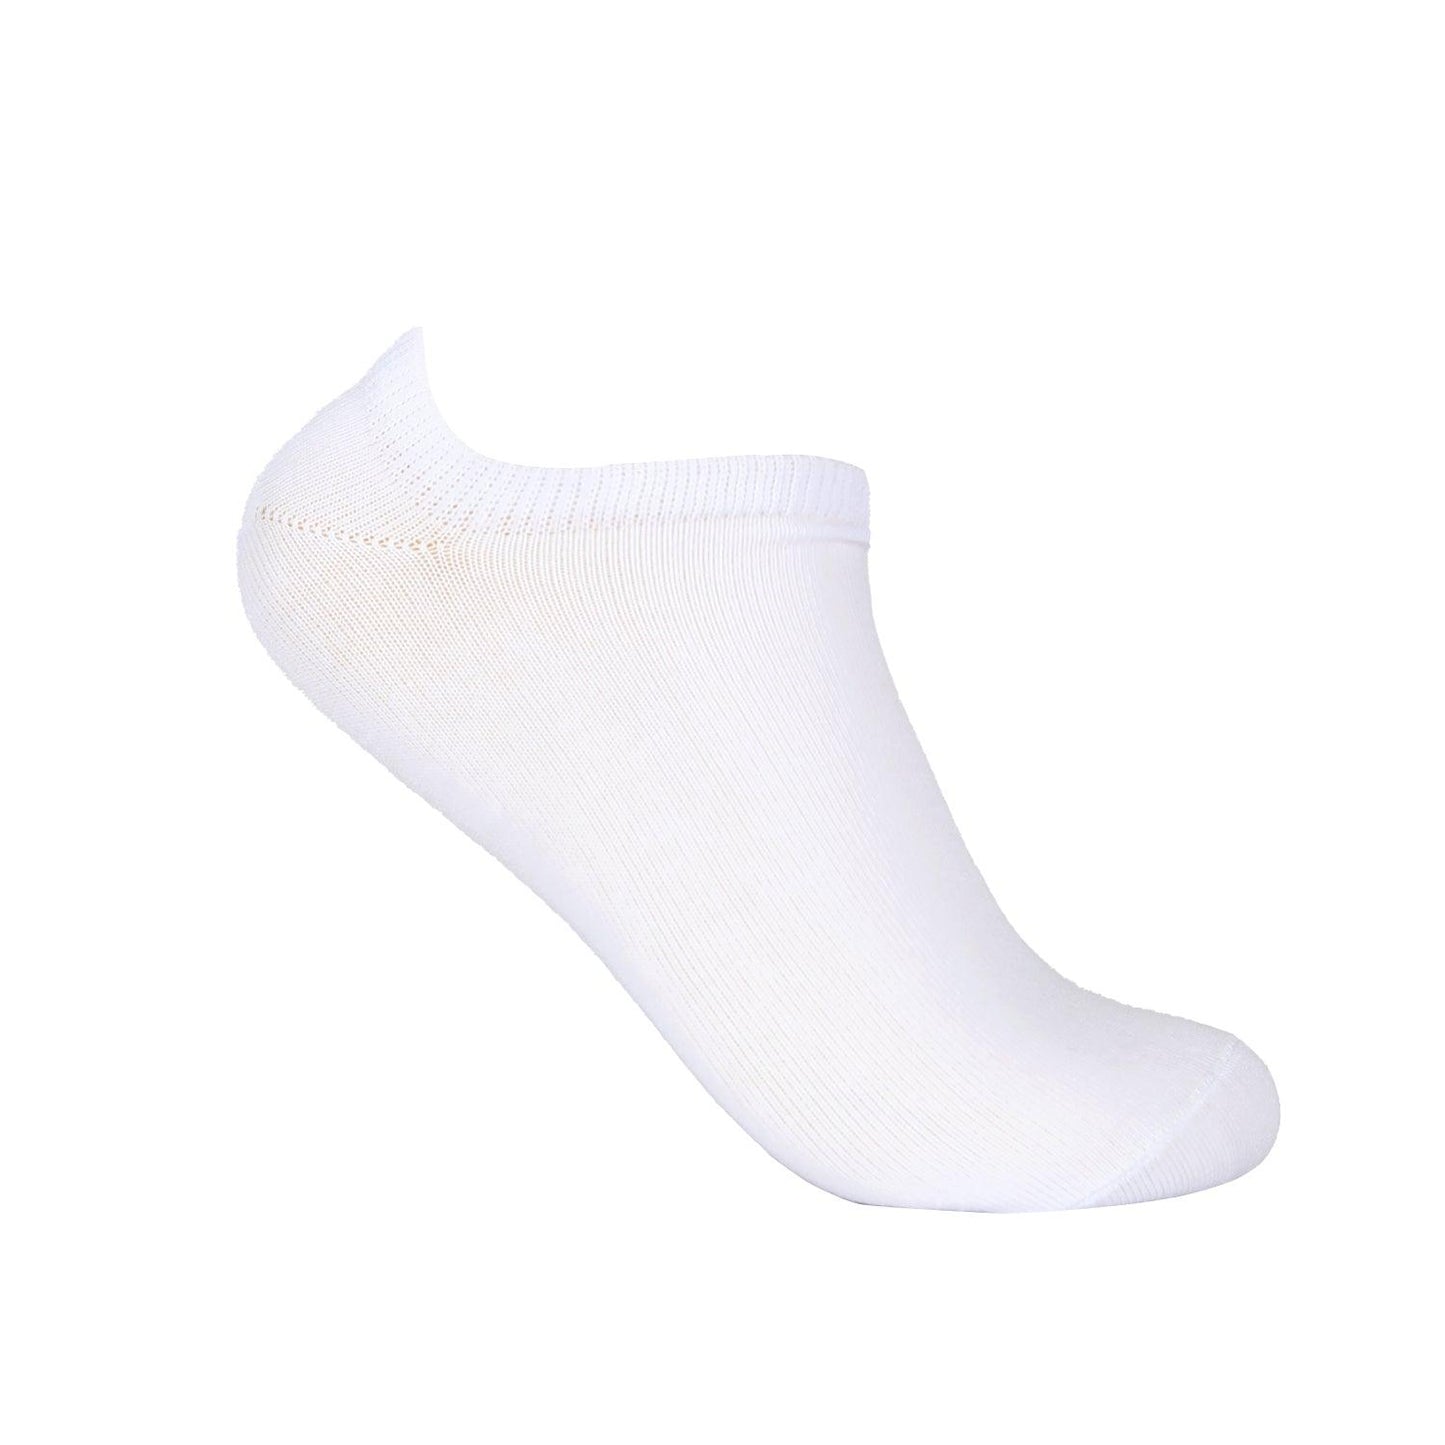 ACTIV GIRLS ANKLE SOCKS PACK*3 - COLORS A-937 Activ Abou Alaa